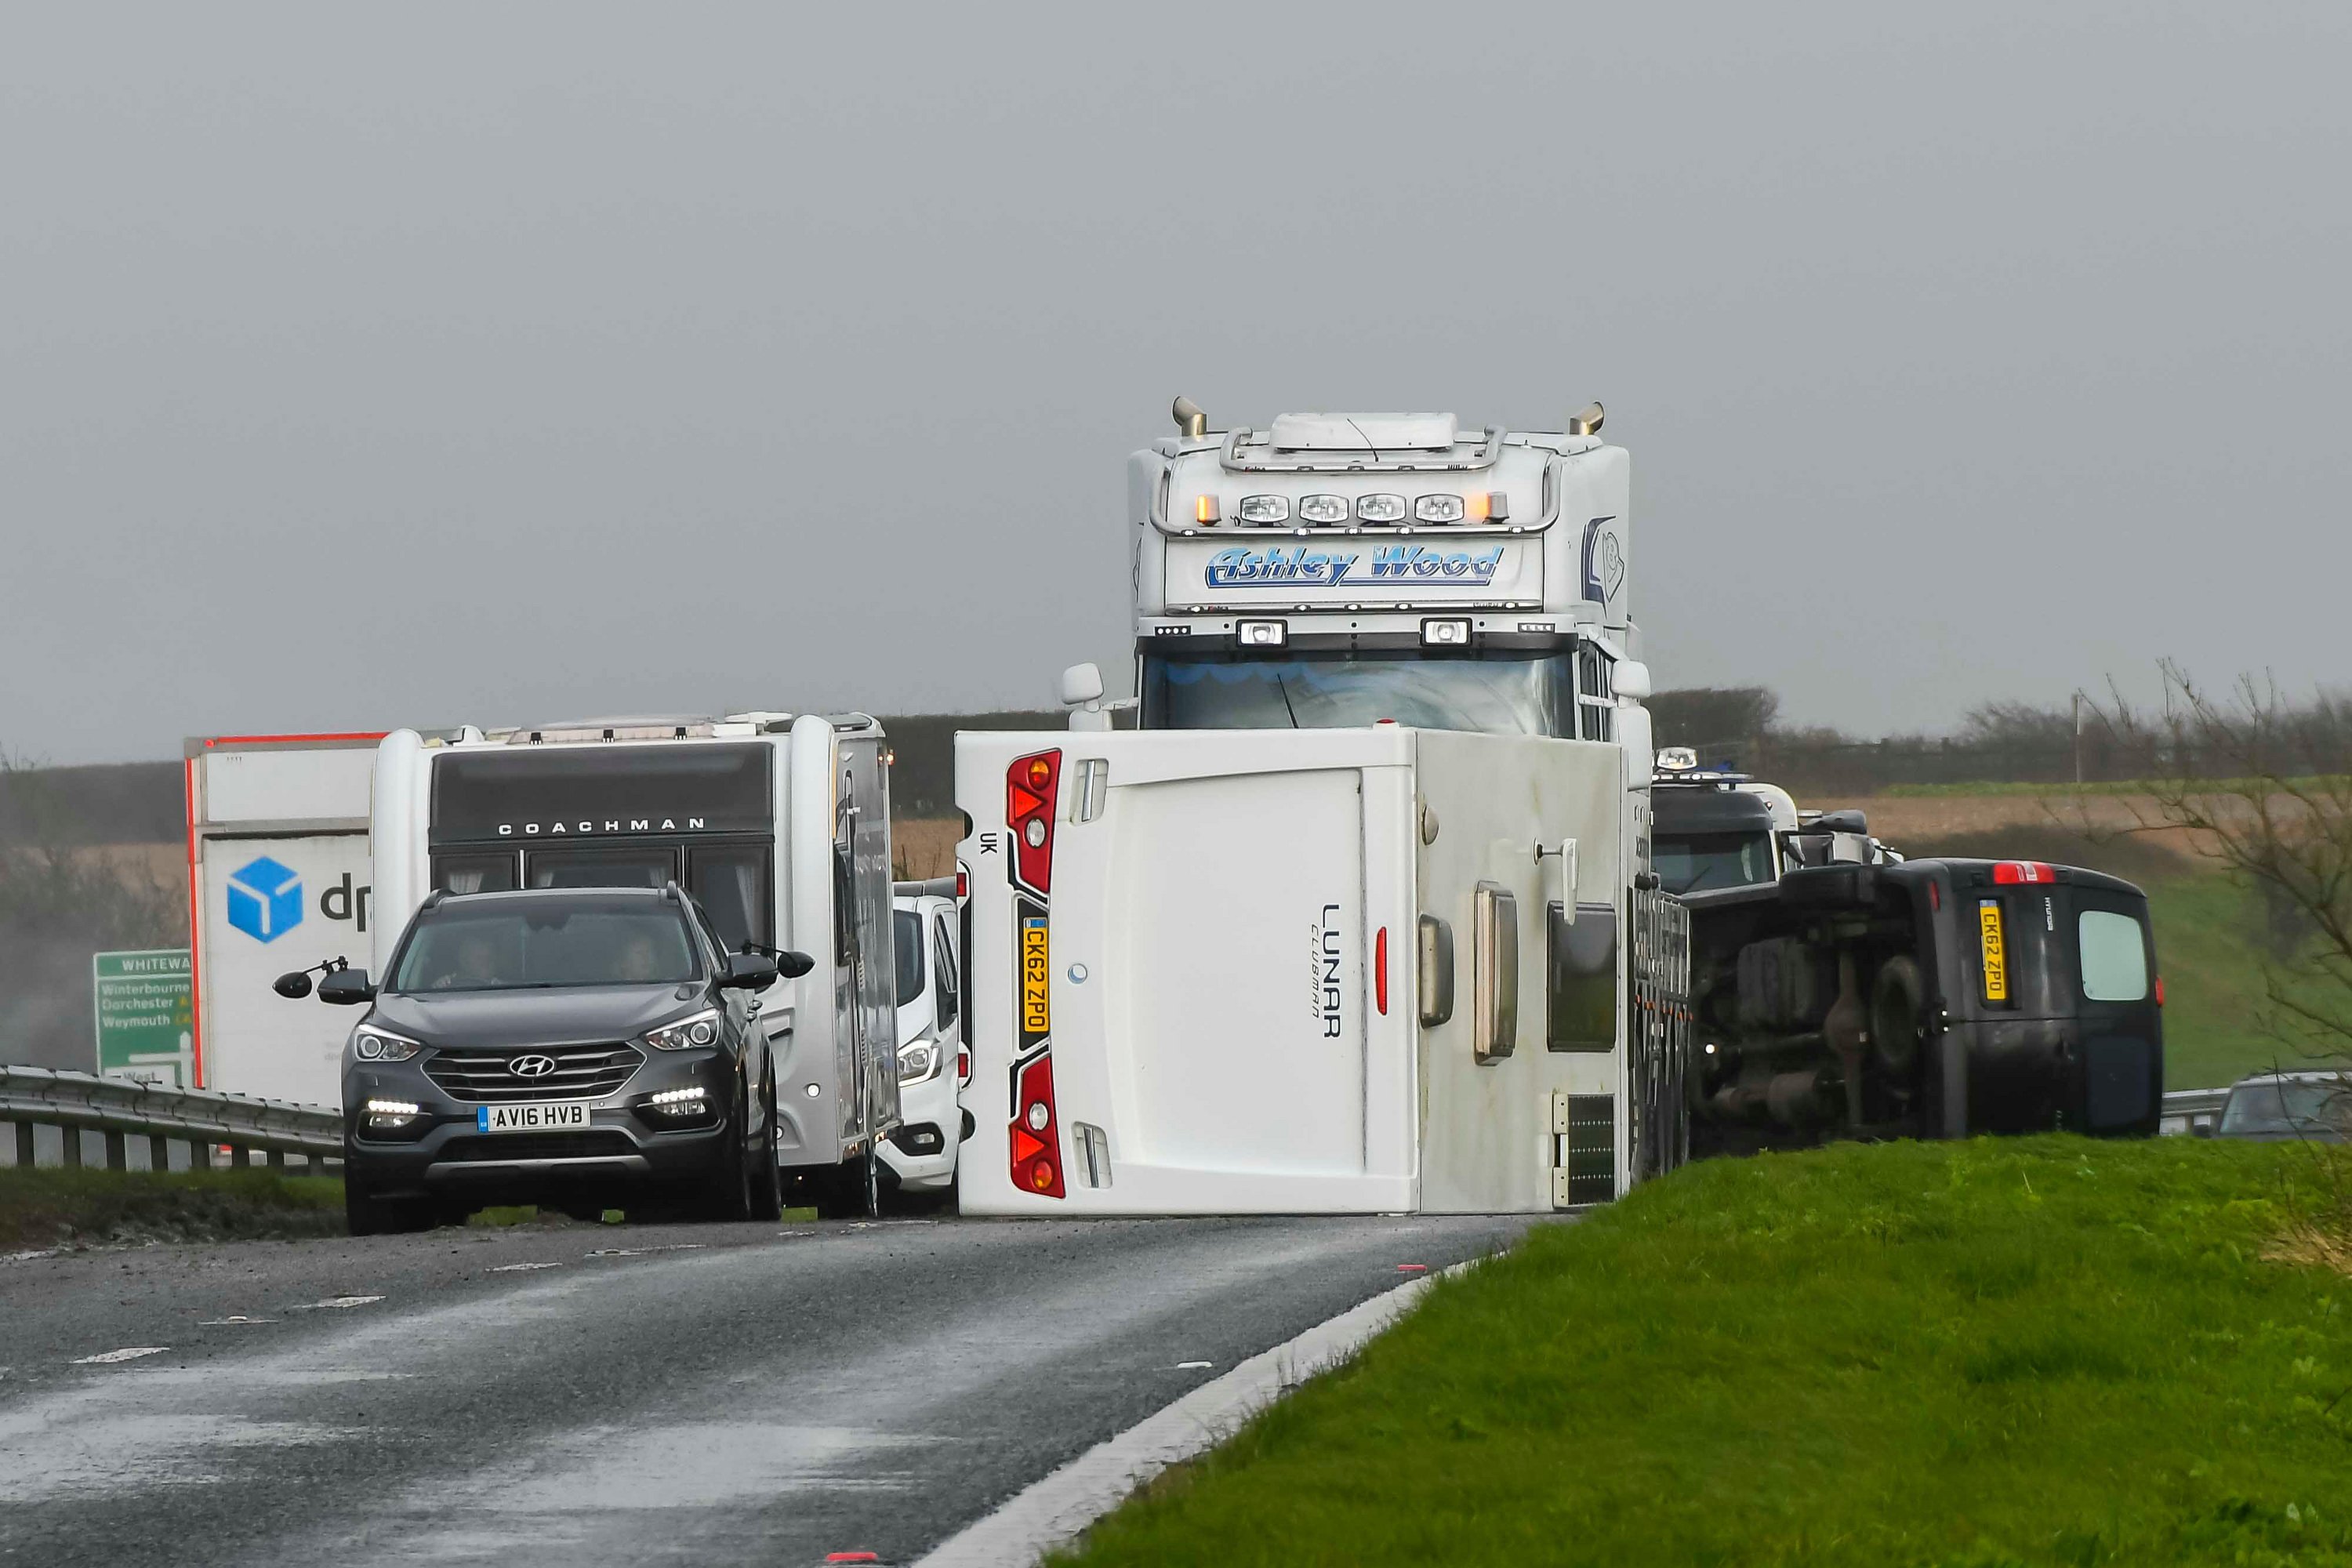 A van towing a caravan was blown over by gale force winds from Storm Nelson, blocking one lane of the A35 at Litton Cheney in Dorset